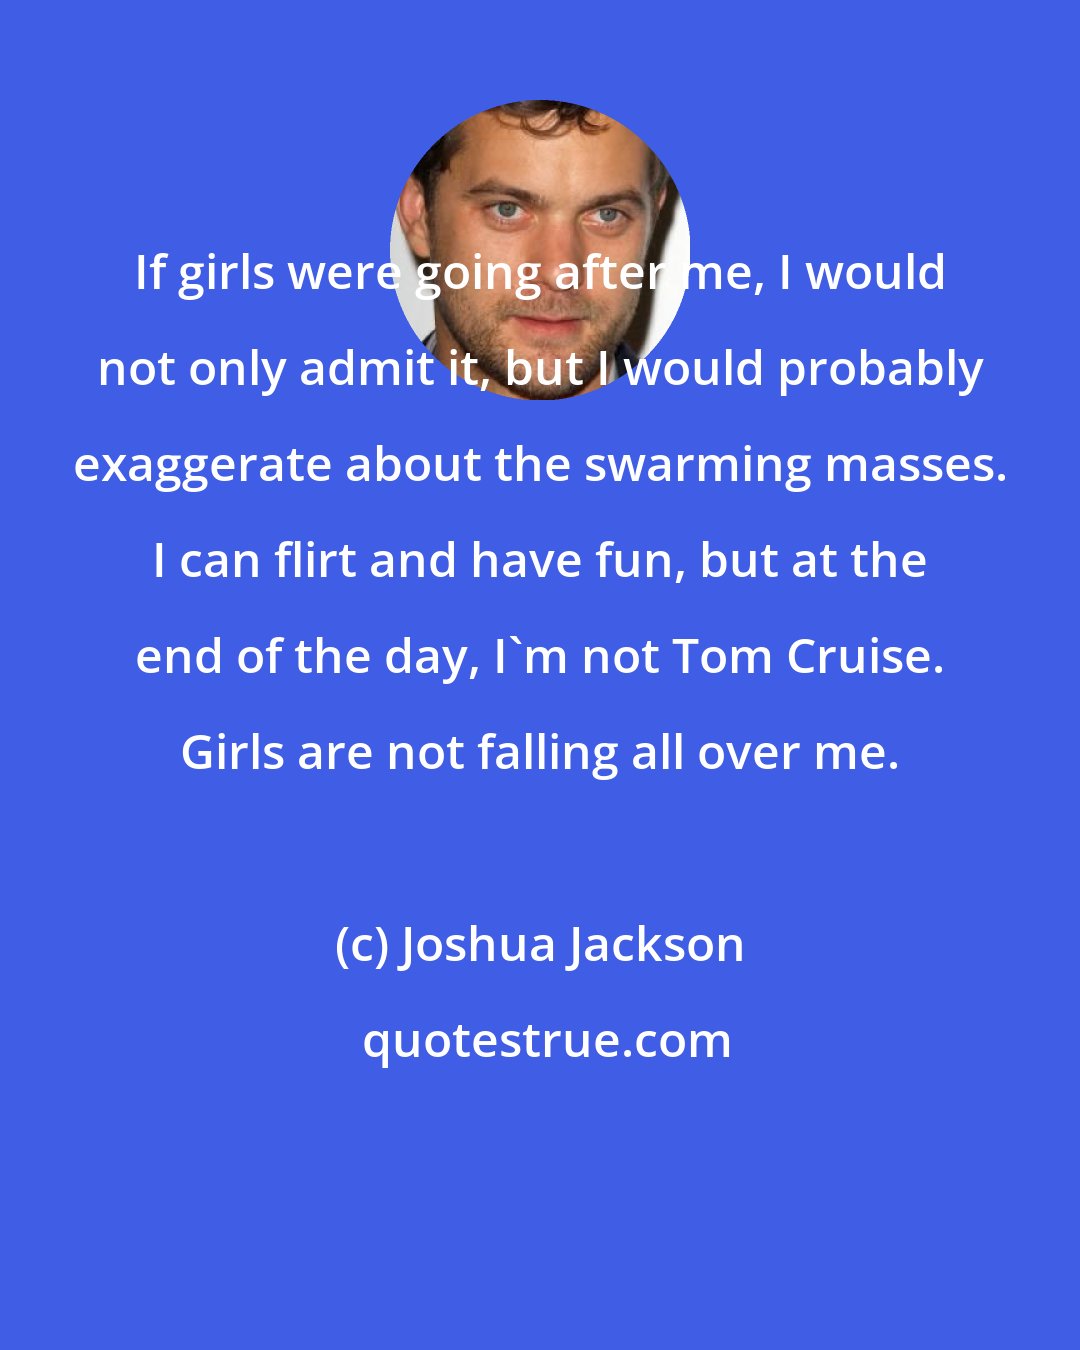 Joshua Jackson: If girls were going after me, I would not only admit it, but I would probably exaggerate about the swarming masses. I can flirt and have fun, but at the end of the day, I'm not Tom Cruise. Girls are not falling all over me.